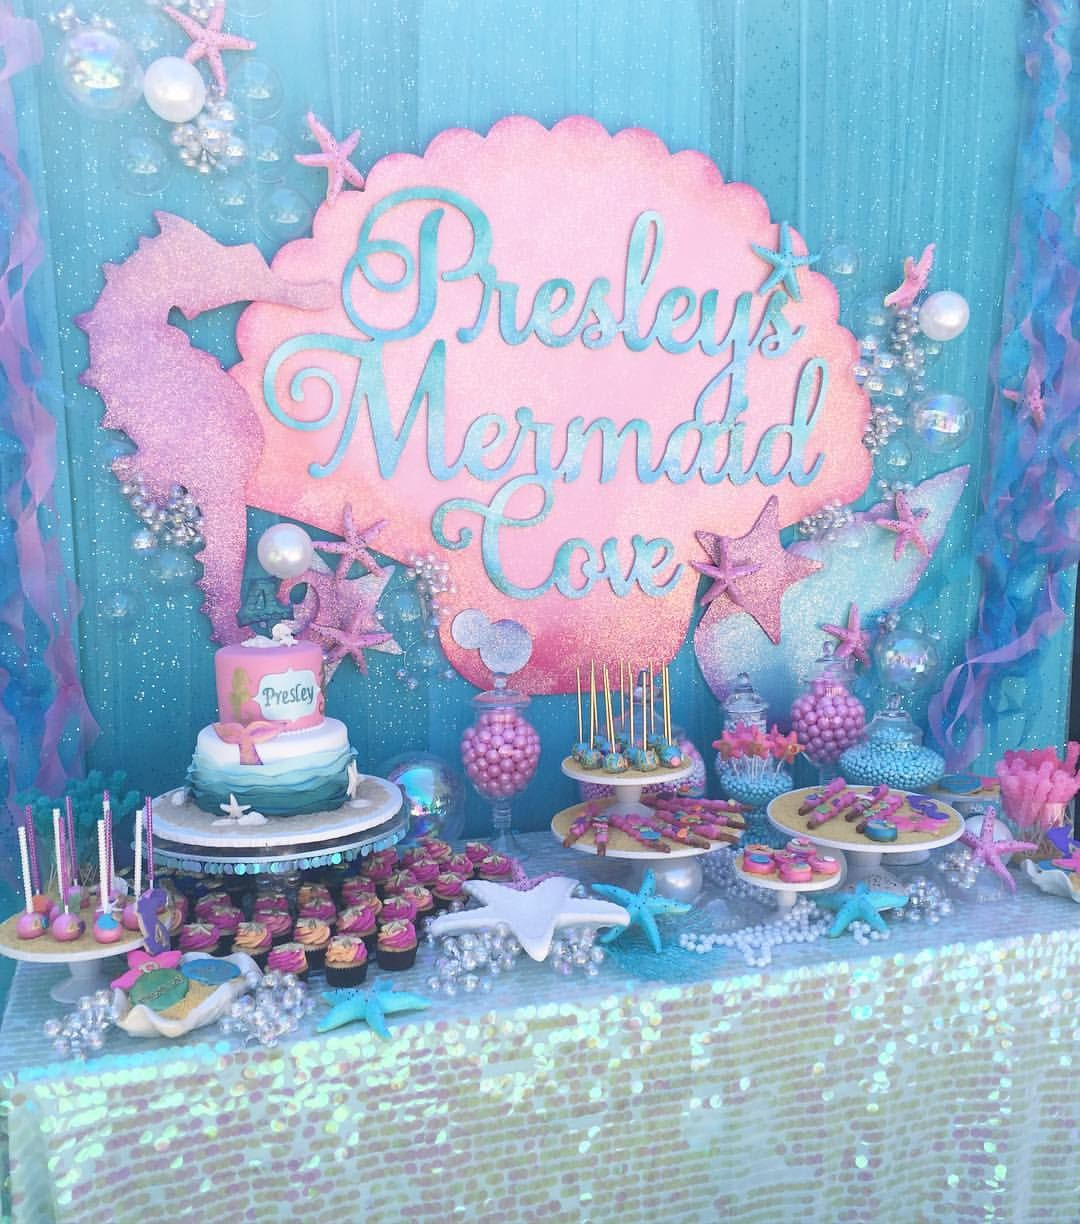 Mermaid Theme Party Ideas
 Up bright and early for the most adorable mermaid party